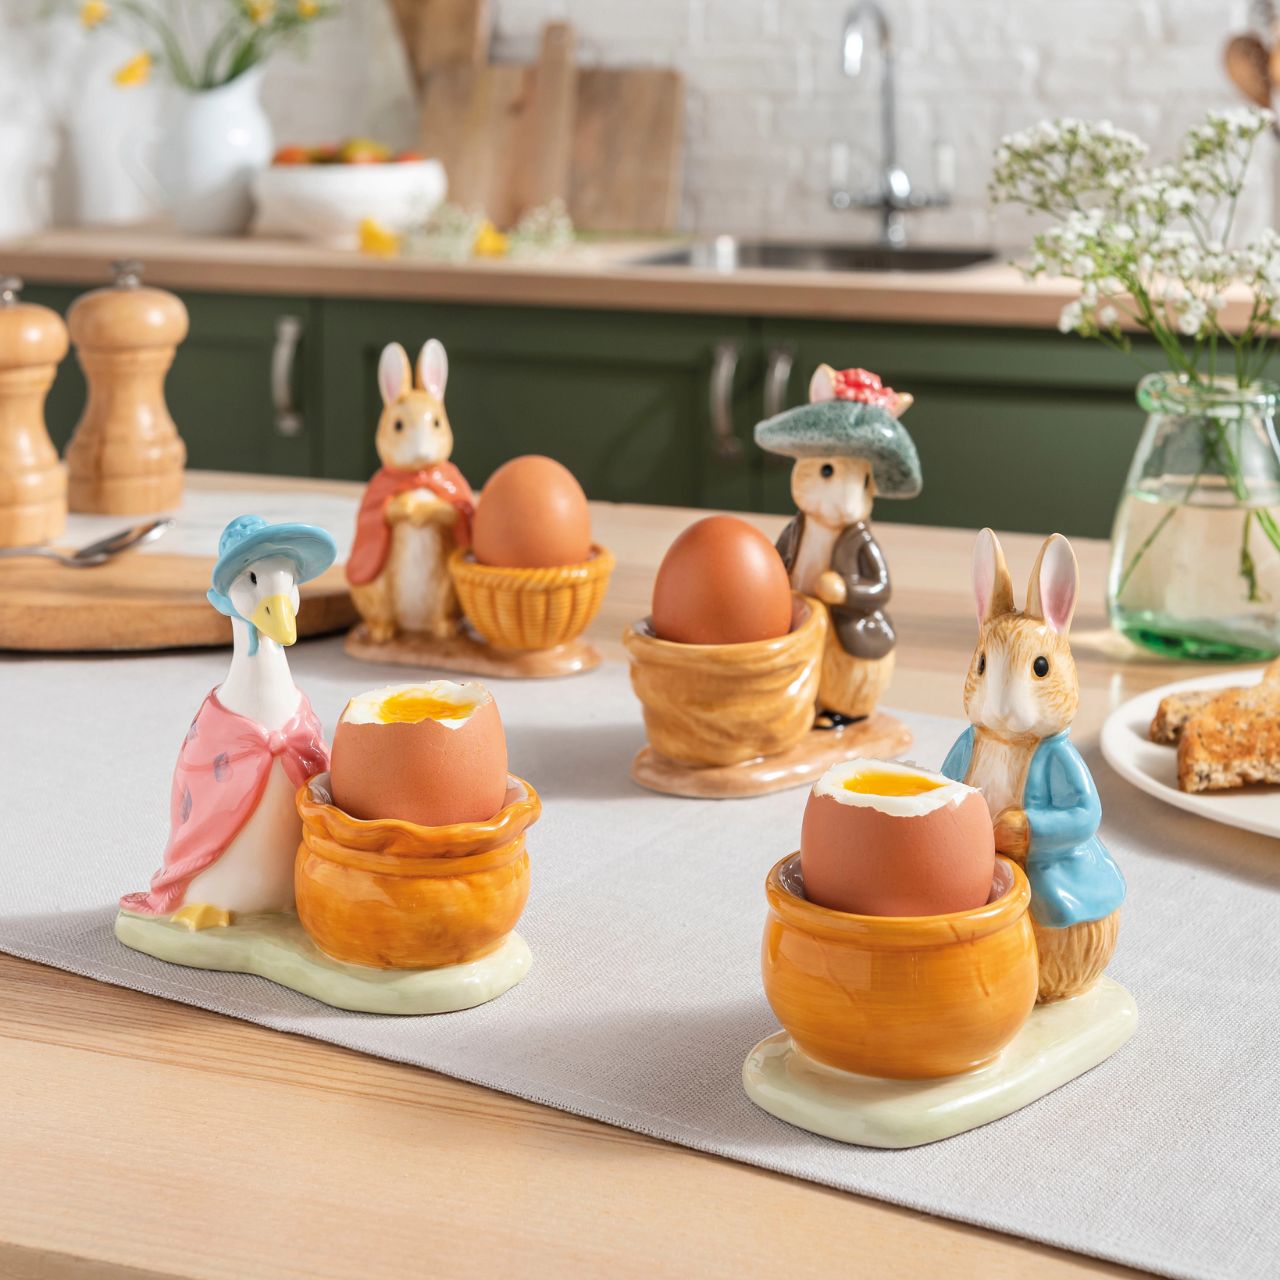 Peter Rabbit Flopsy Egg Cup  Serve your morning eggs in style with our unique and charming Flopsy egg cup, because regular egg cups aren't all they're cracked up to be... This beautiful Beatrix Potter egg cup has been made from sturdy ceramic and makes the ideal. collector's piece or gift. We recommend you use large eggs to feel the true benefit, or why not fill with mini chocolate eggs for a sweet easter gift.